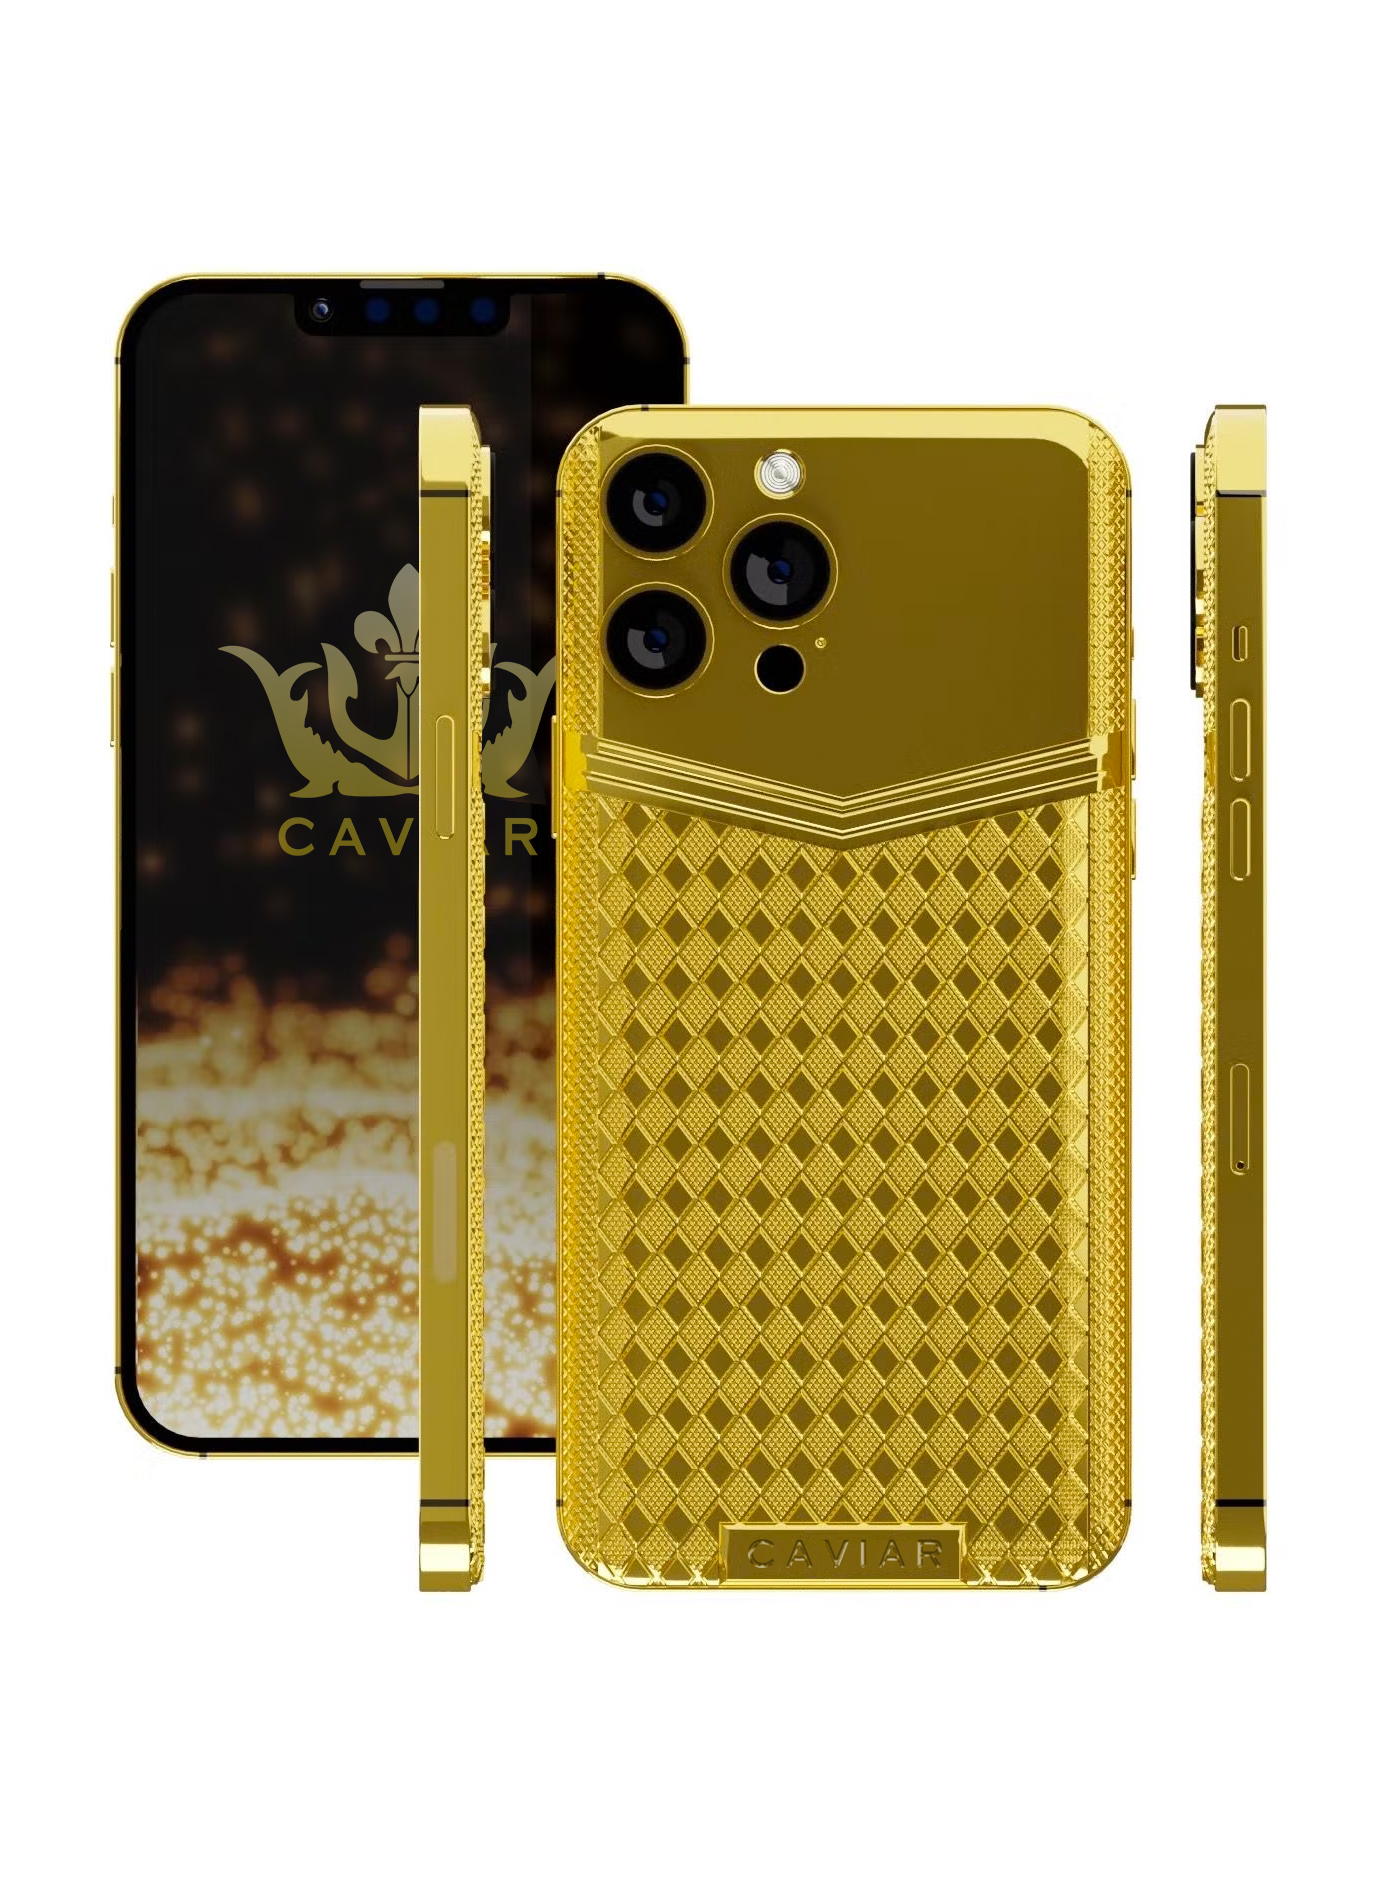 Caviar Luxury 24K Gold Customized iPhone 14 Pro Max Limited Edition 128 GB